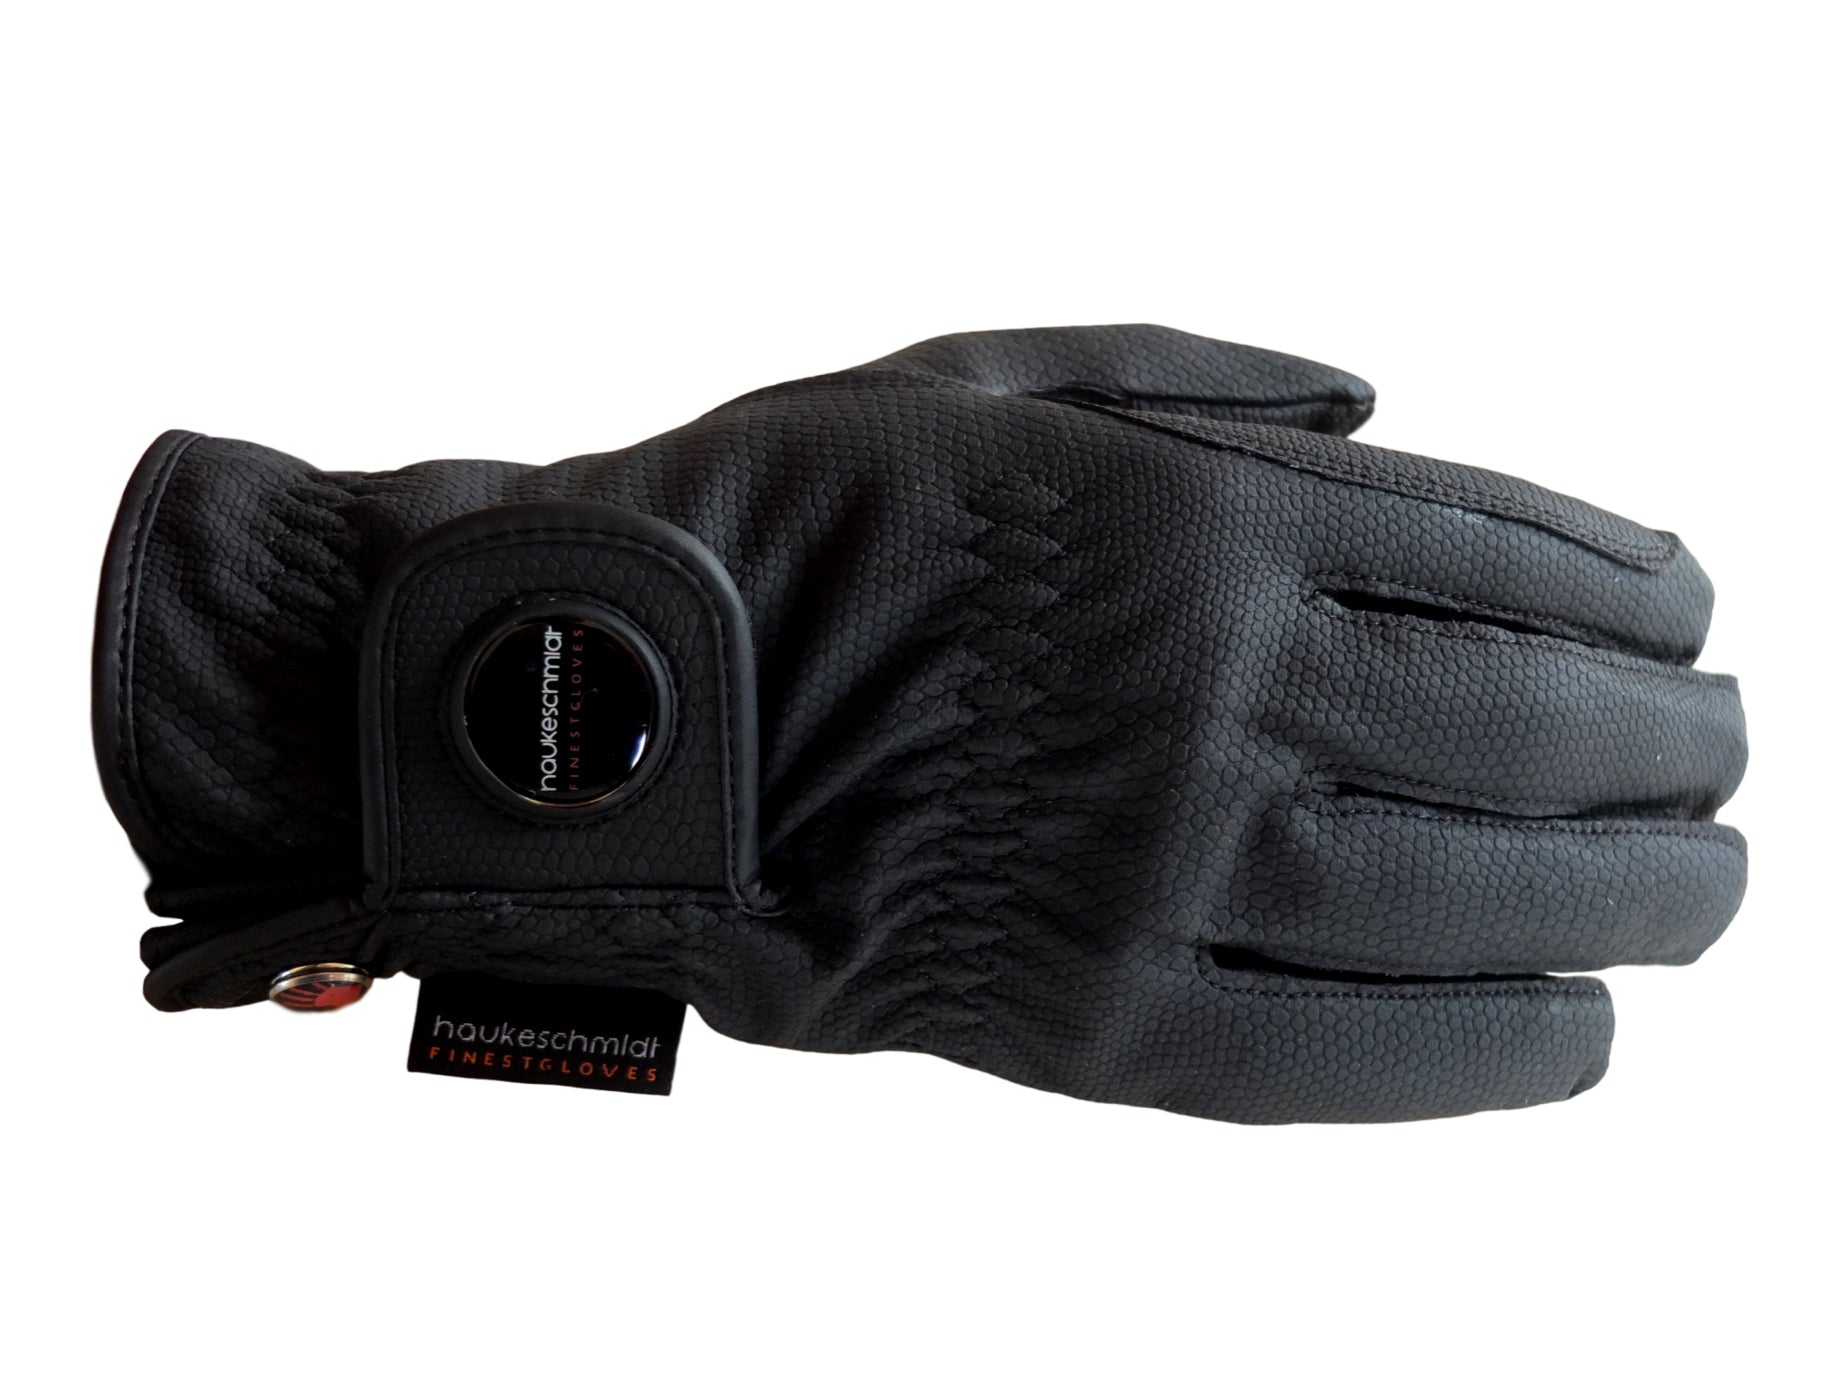 Haukeschmidt Nordic Dream Ladies Winter Riding Gloves with Thinsulate™ lining